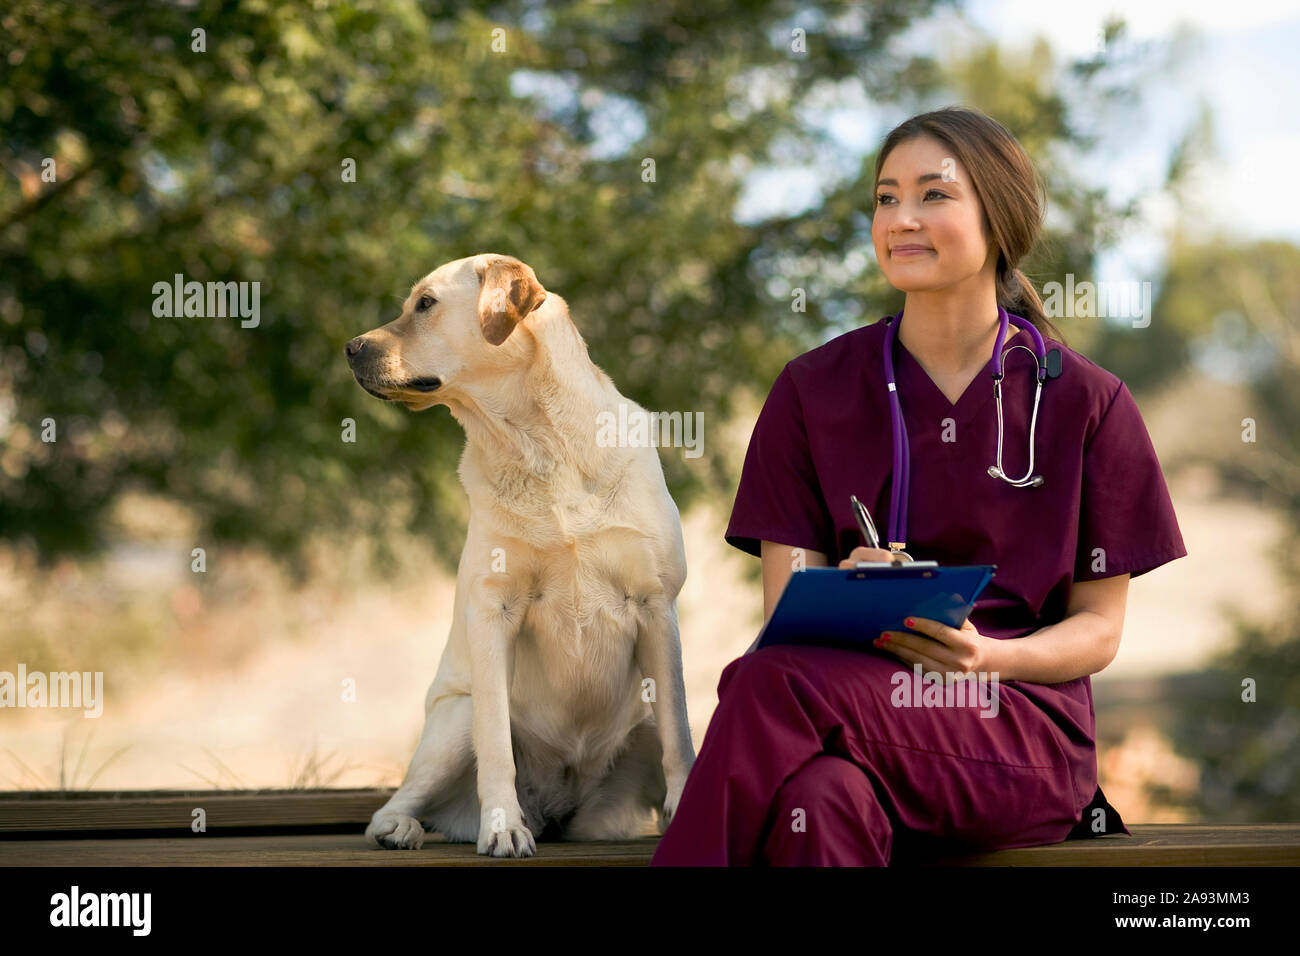 Smiling young nurse sits contentedly in the sunny garden  with a friendly dog Stock Photo